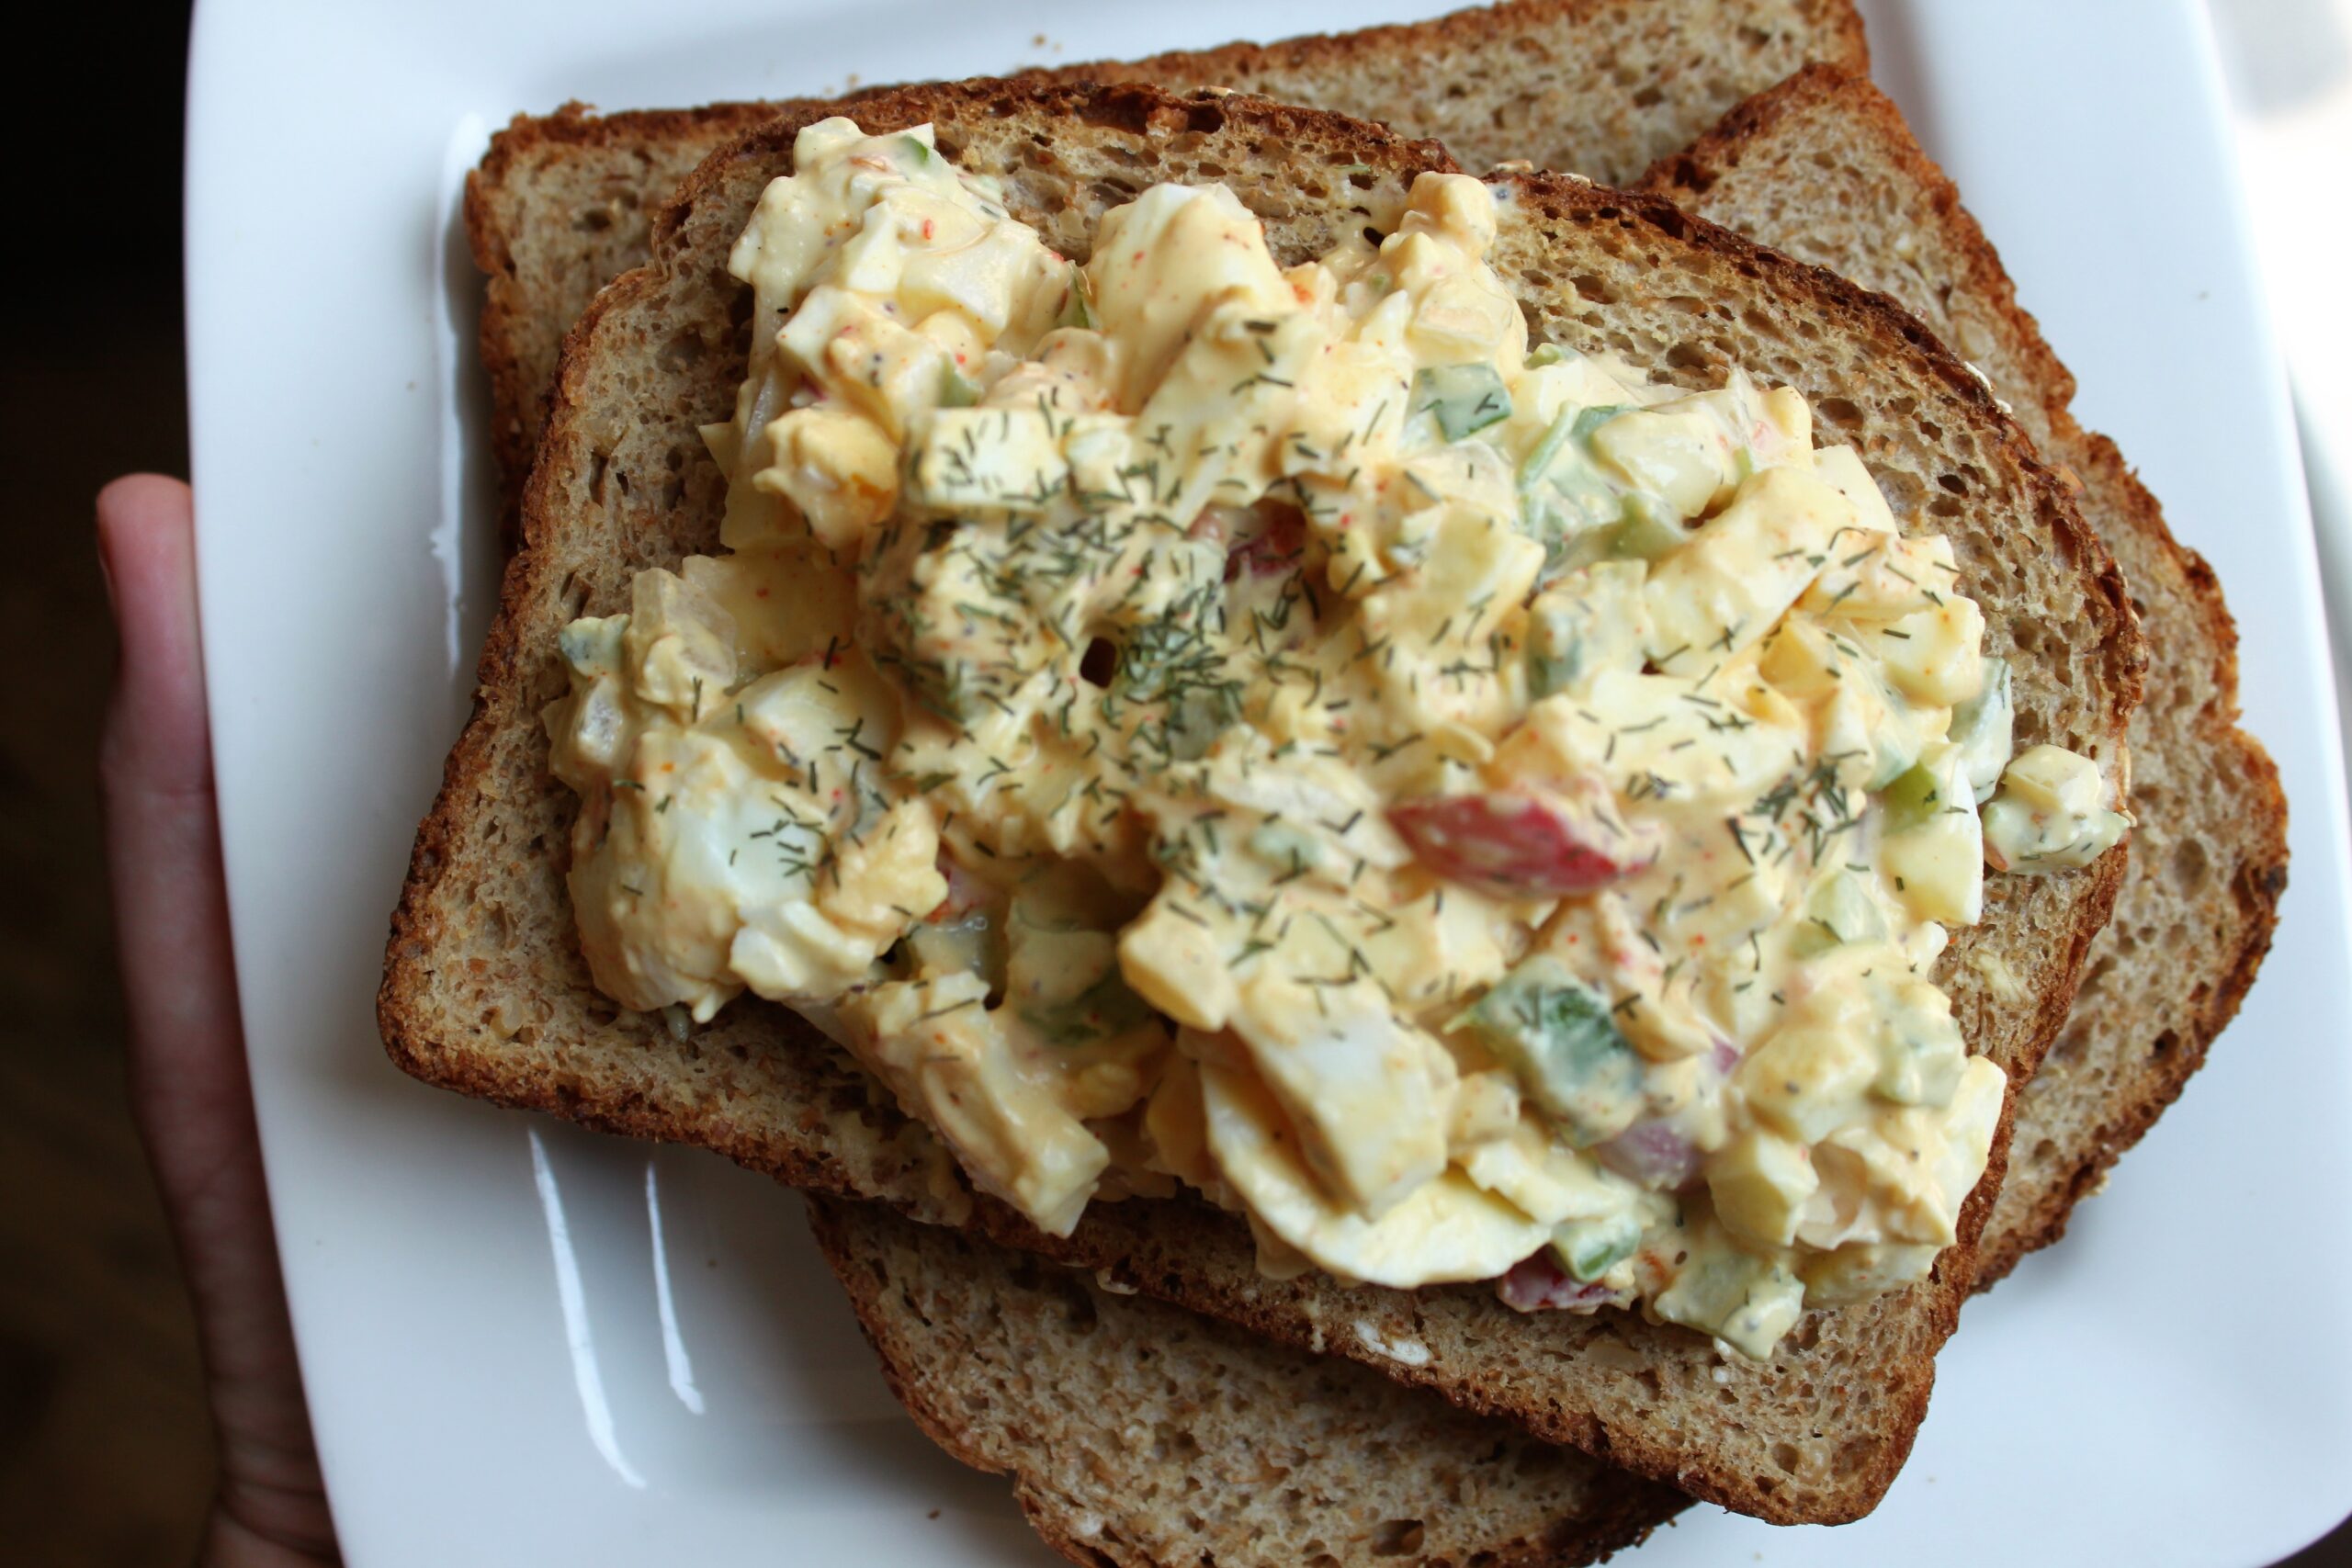 egg salad recipe, easy, home cooking